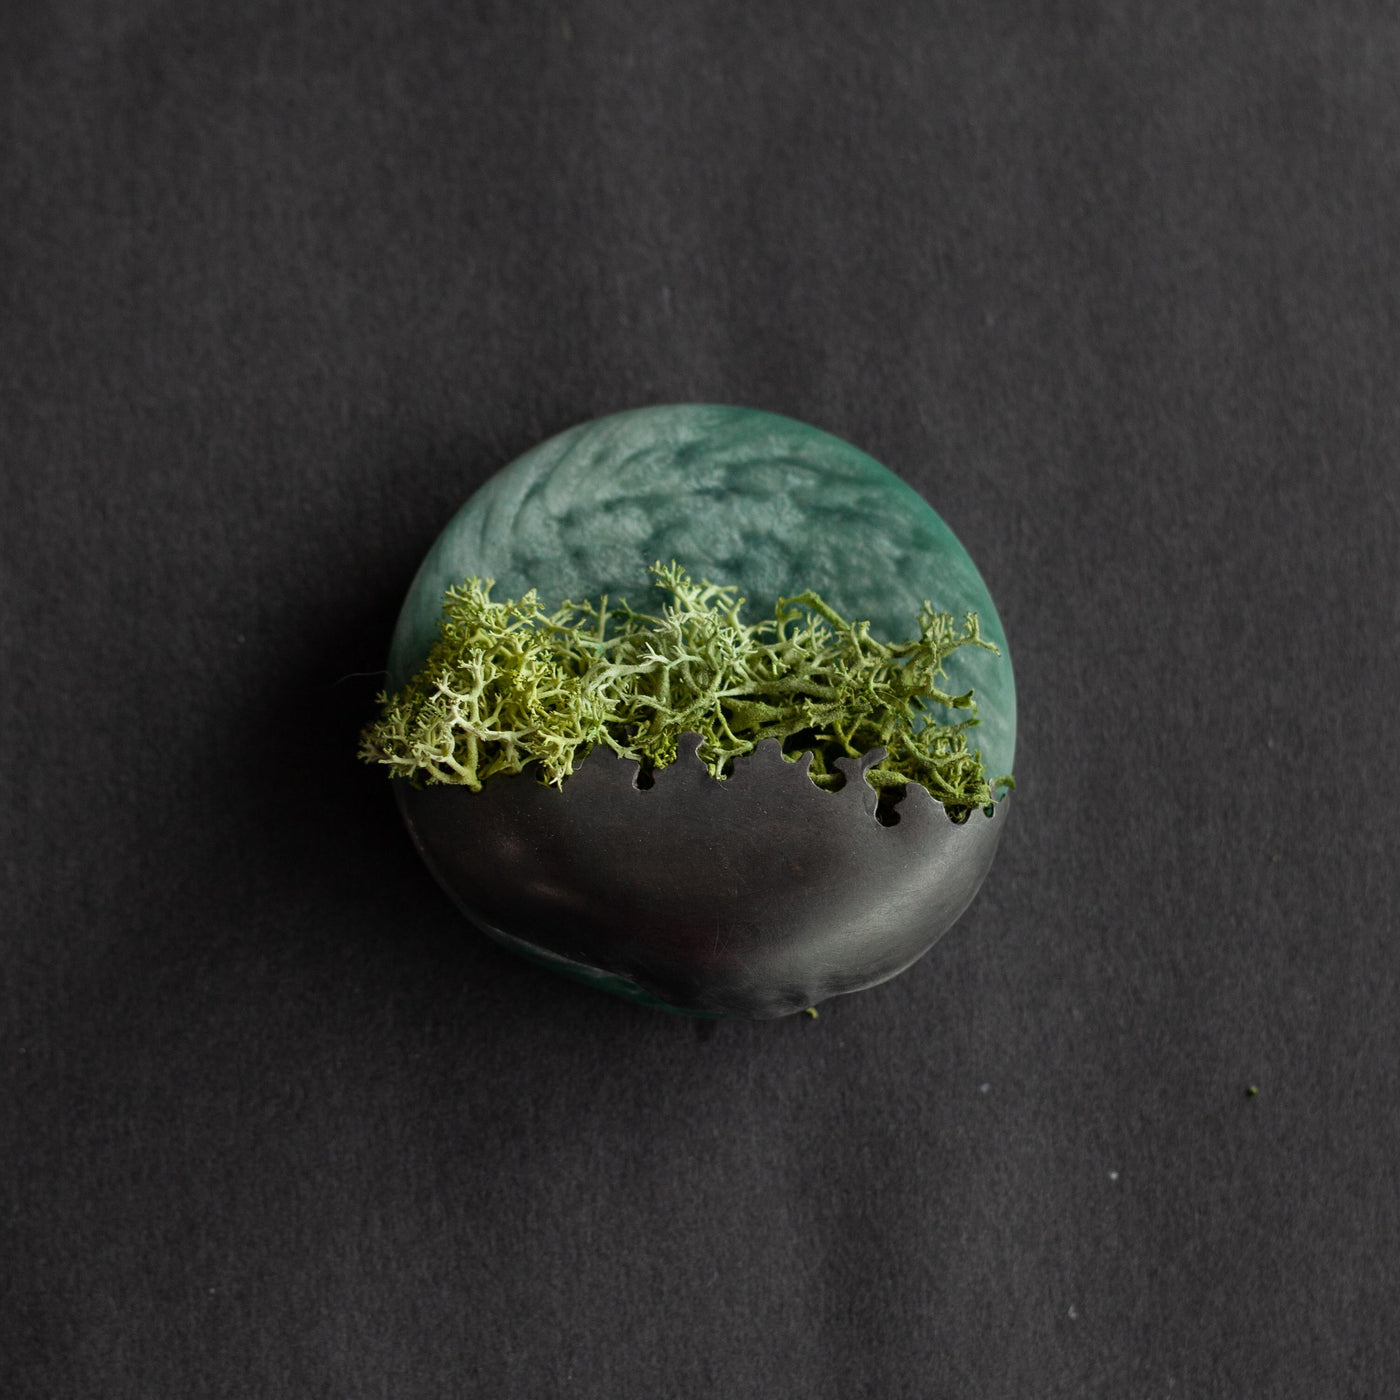 resin　Byre　Eco　forage　Ward　The　moss　–　Gallery　silver　and　Libby　brooch